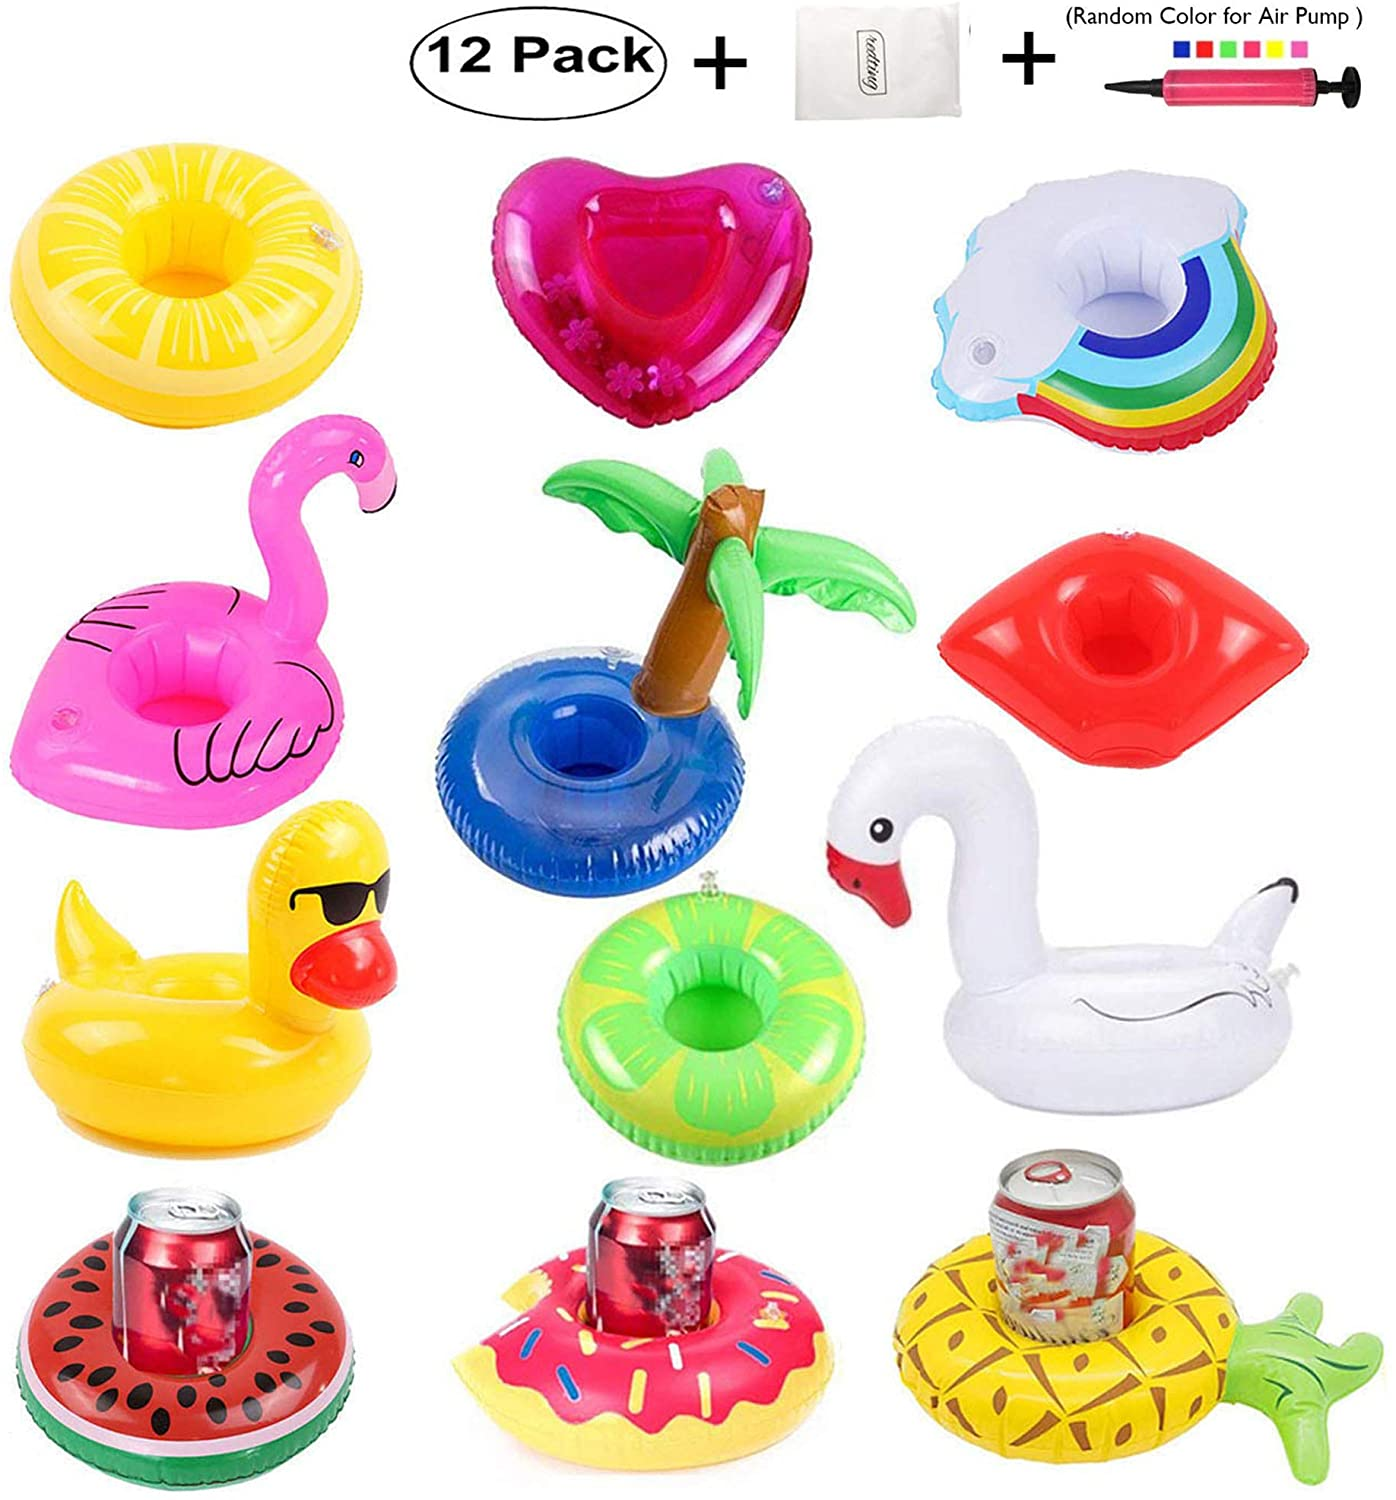 12 Pack Inflatable Drink Holders+1 Inflatable Needle+1 Storage Bag，Drink Floats Inflatable Cup Coasters for Kids Toys and Pool Party